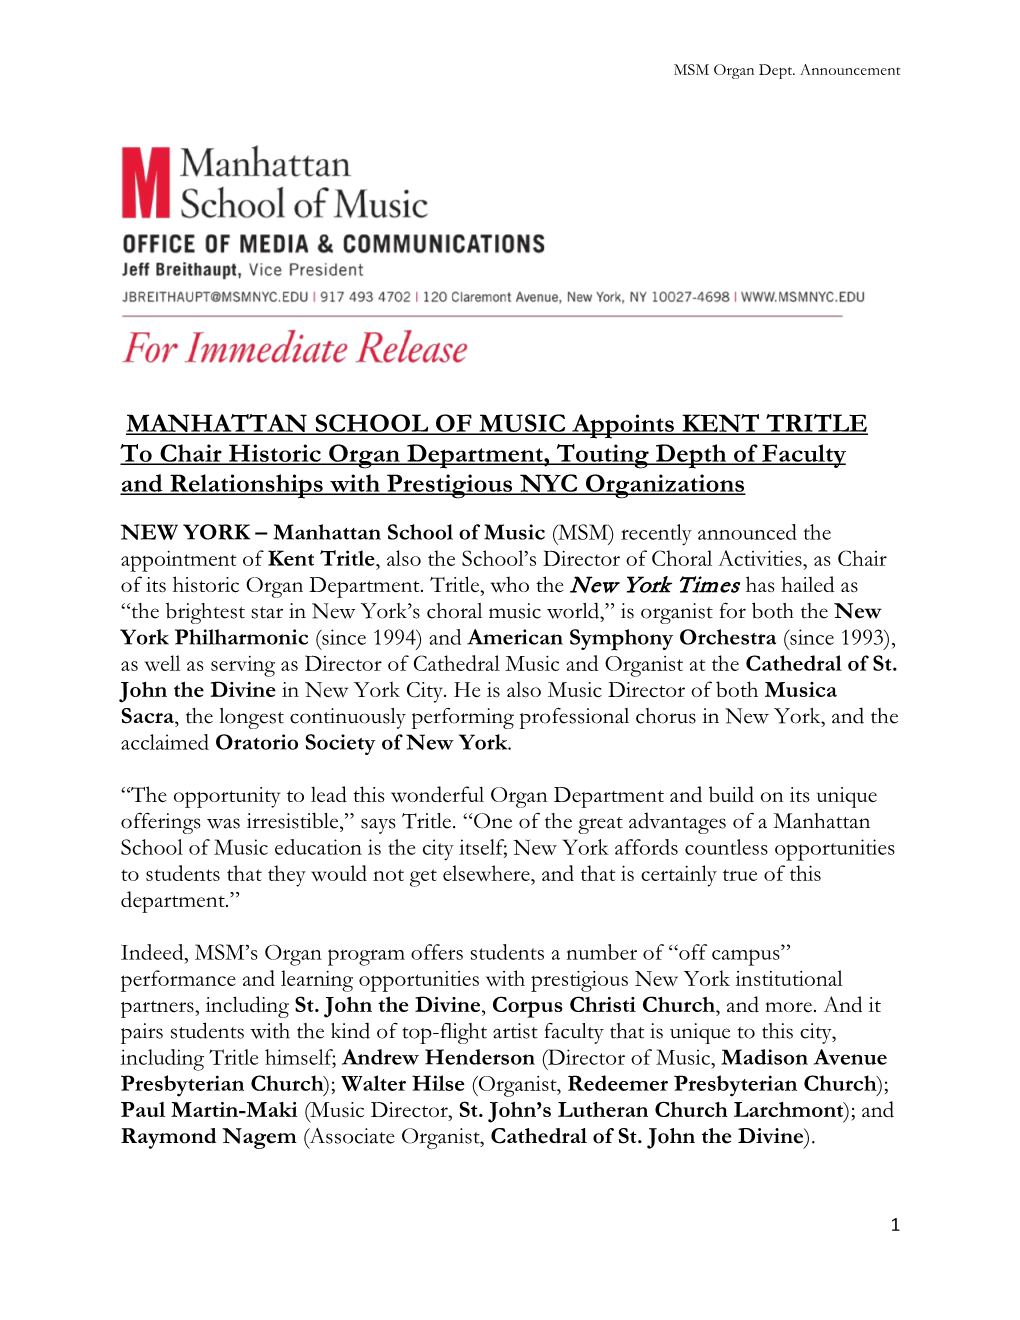 MANHATTAN SCHOOL of MUSIC Appoints KENT TRITLE to Chair Historic Organ Department, Touting Depth of Faculty and Relationships with Prestigious NYC Organizations